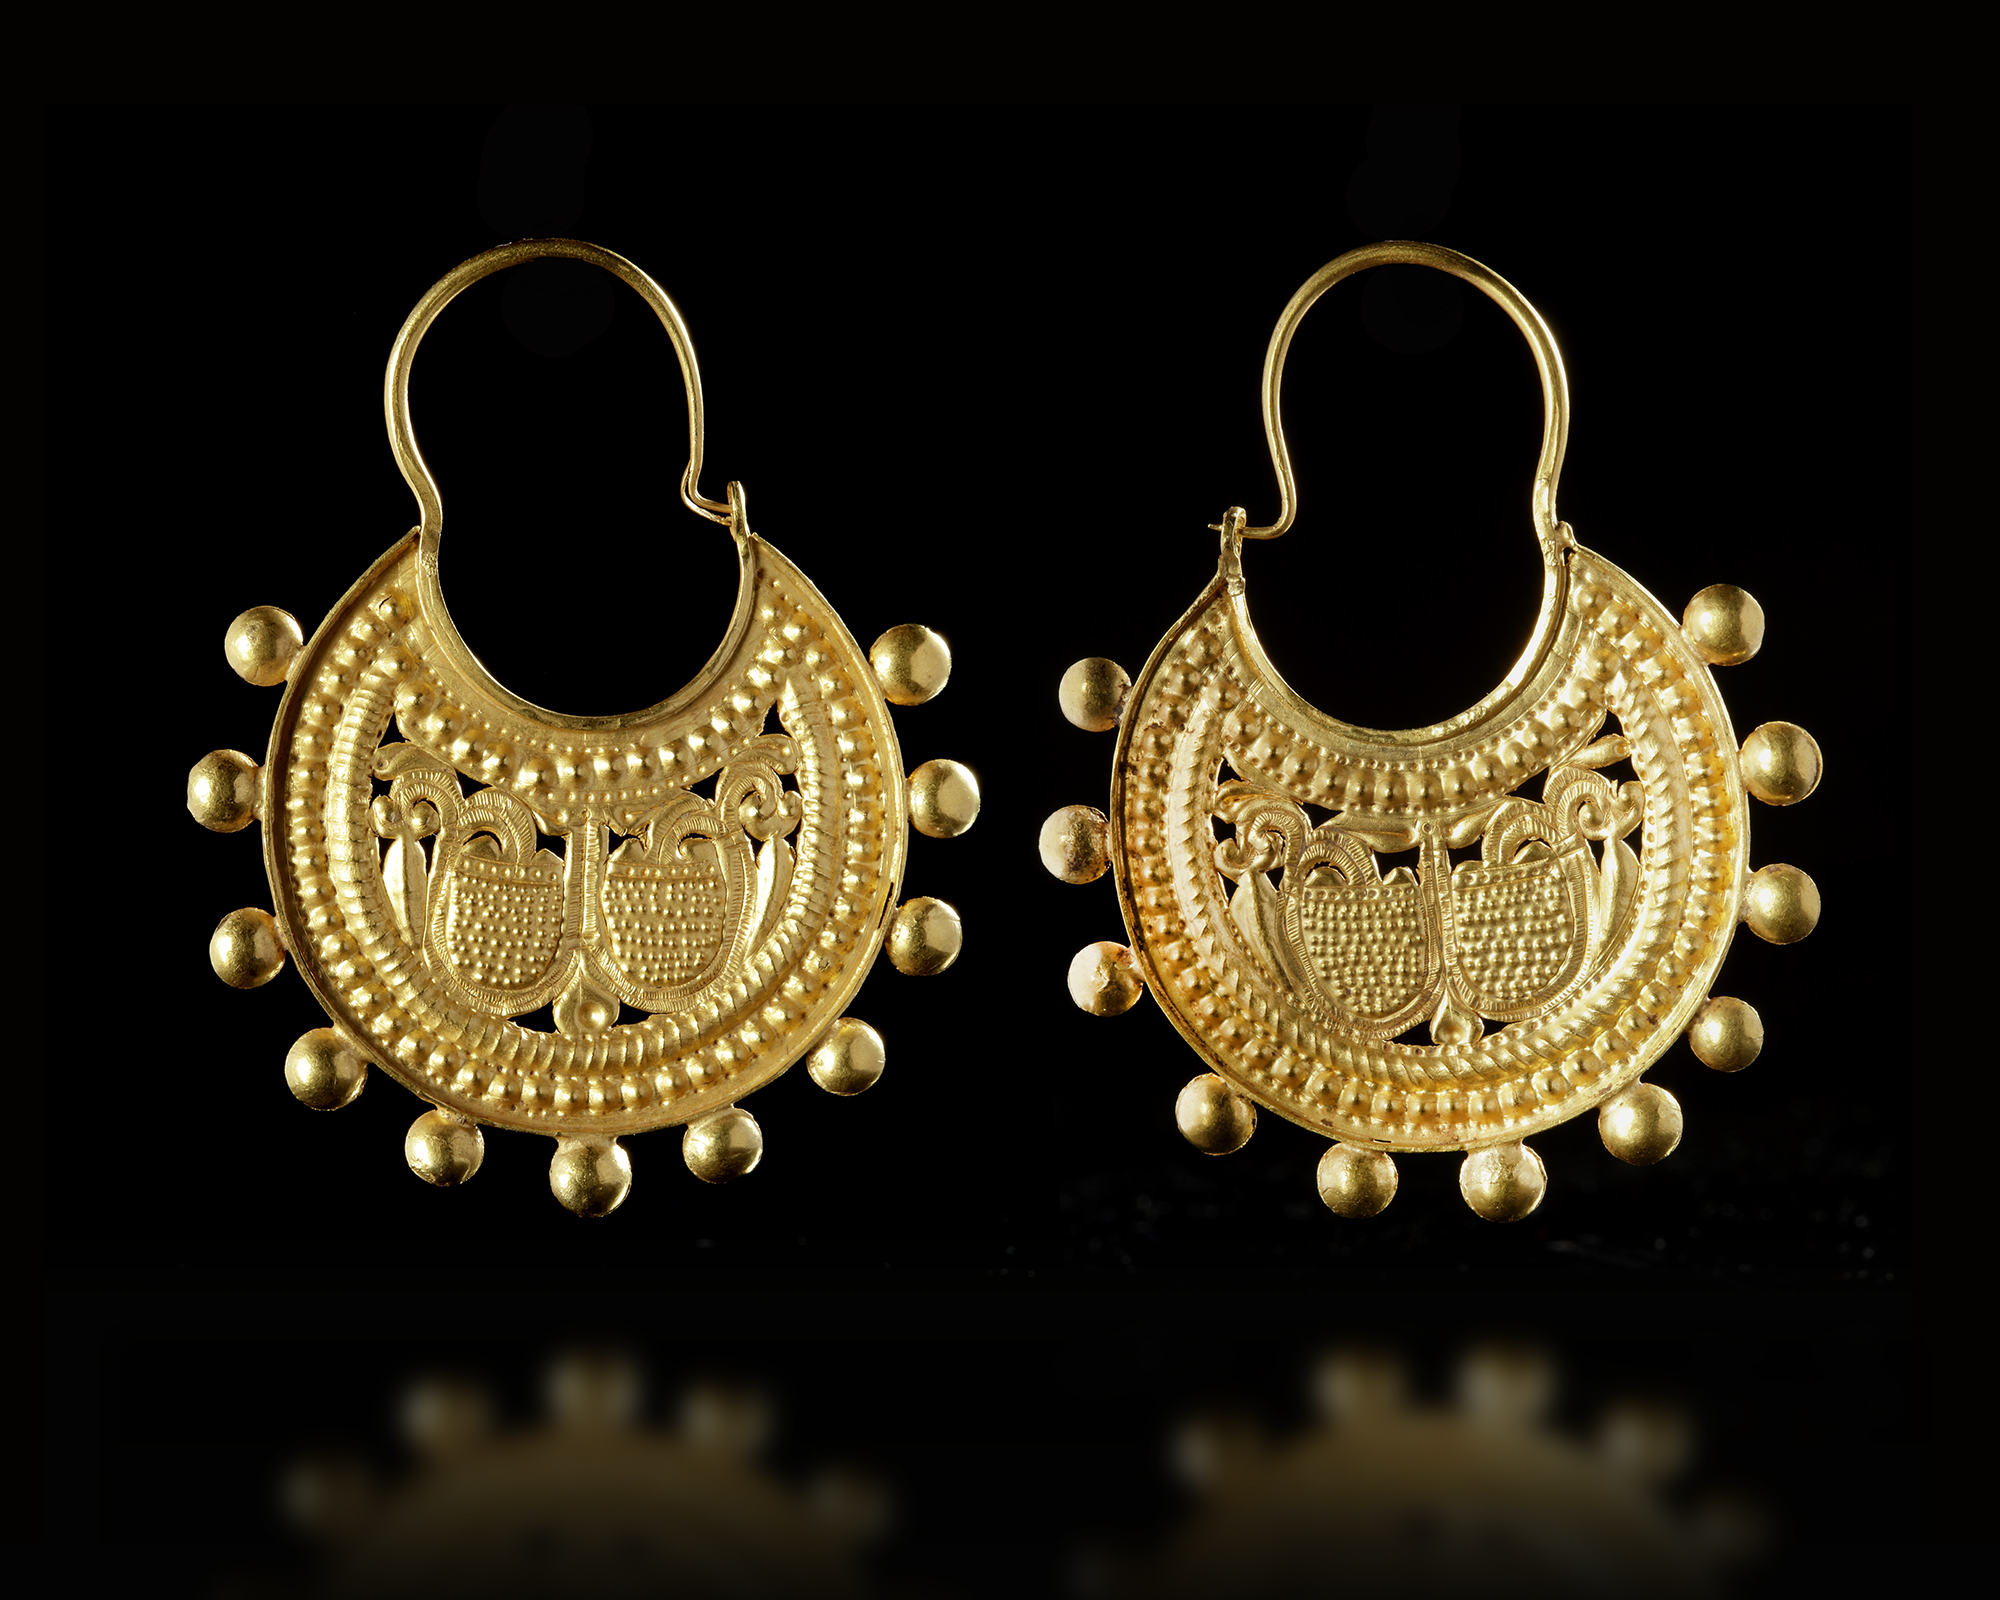 A PAIR OF BYZANTINE GOLD LUNATE EARRINGS, 6TH-7TH CENTURY AD - Image 2 of 4